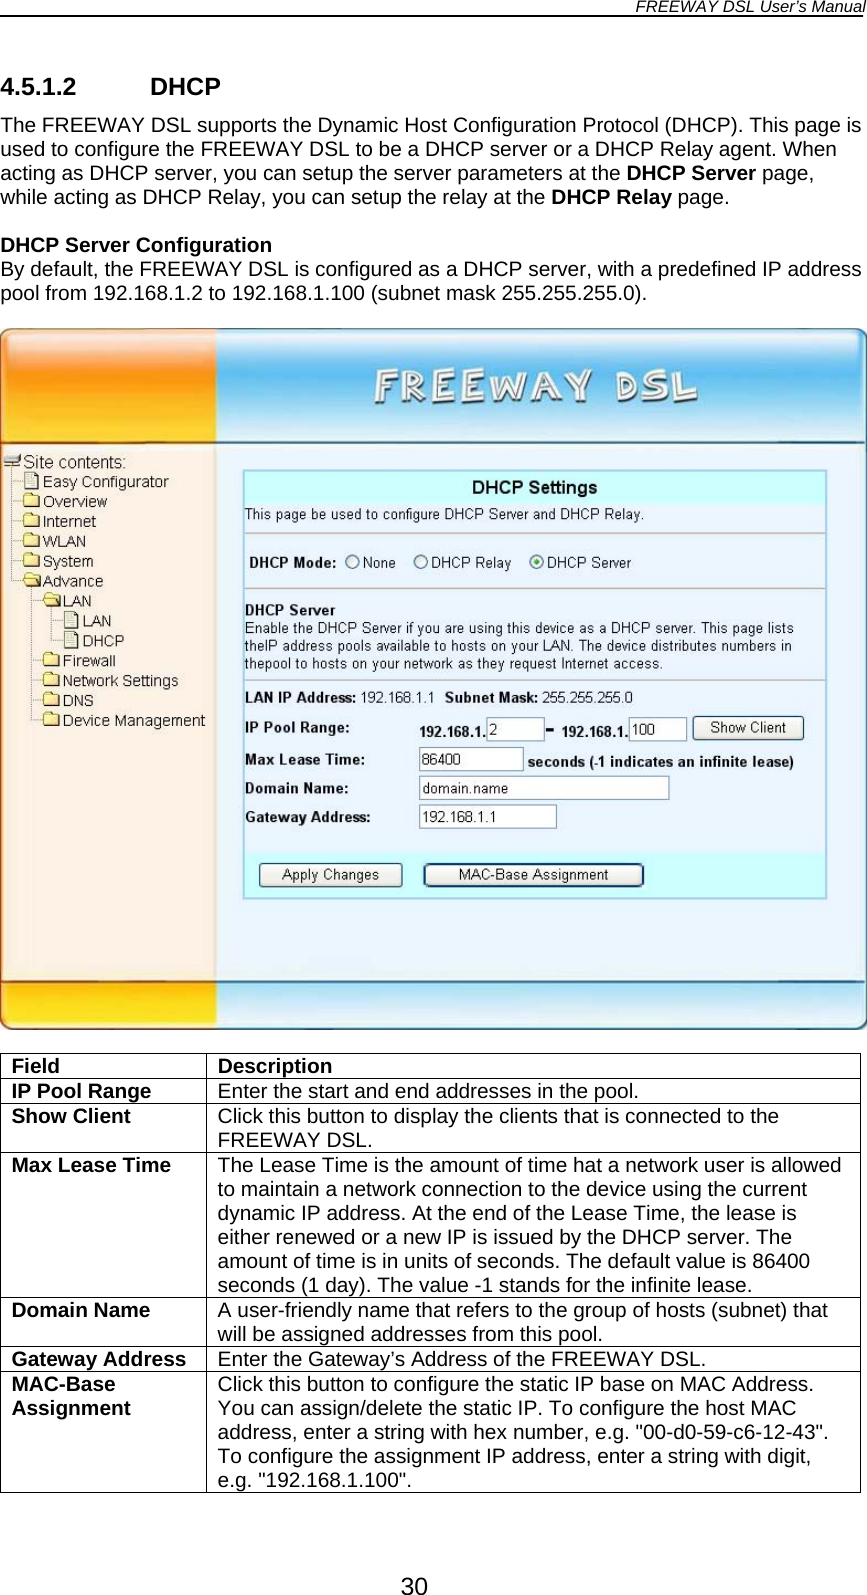 FREEWAY DSL User’s Manual  4.5.1.2 DHCP The FREEWAY DSL supports the Dynamic Host Configuration Protocol (DHCP). This page is used to configure the FREEWAY DSL to be a DHCP server or a DHCP Relay agent. When acting as DHCP server, you can setup the server parameters at the DHCP Server page, while acting as DHCP Relay, you can setup the relay at the DHCP Relay page.  DHCP Server Configuration By default, the FREEWAY DSL is configured as a DHCP server, with a predefined IP address pool from 192.168.1.2 to 192.168.1.100 (subnet mask 255.255.255.0).    Field Description IP Pool Range  Enter the start and end addresses in the pool. Show Client  Click this button to display the clients that is connected to the FREEWAY DSL. Max Lease Time  The Lease Time is the amount of time hat a network user is allowed to maintain a network connection to the device using the current dynamic IP address. At the end of the Lease Time, the lease is either renewed or a new IP is issued by the DHCP server. The amount of time is in units of seconds. The default value is 86400 seconds (1 day). The value -1 stands for the infinite lease. Domain Name  A user-friendly name that refers to the group of hosts (subnet) that will be assigned addresses from this pool. Gateway Address  Enter the Gateway’s Address of the FREEWAY DSL. MAC-Base Assignment  Click this button to configure the static IP base on MAC Address. You can assign/delete the static IP. To configure the host MAC address, enter a string with hex number, e.g. &quot;00-d0-59-c6-12-43&quot;. To configure the assignment IP address, enter a string with digit, e.g. &quot;192.168.1.100&quot;.  30 